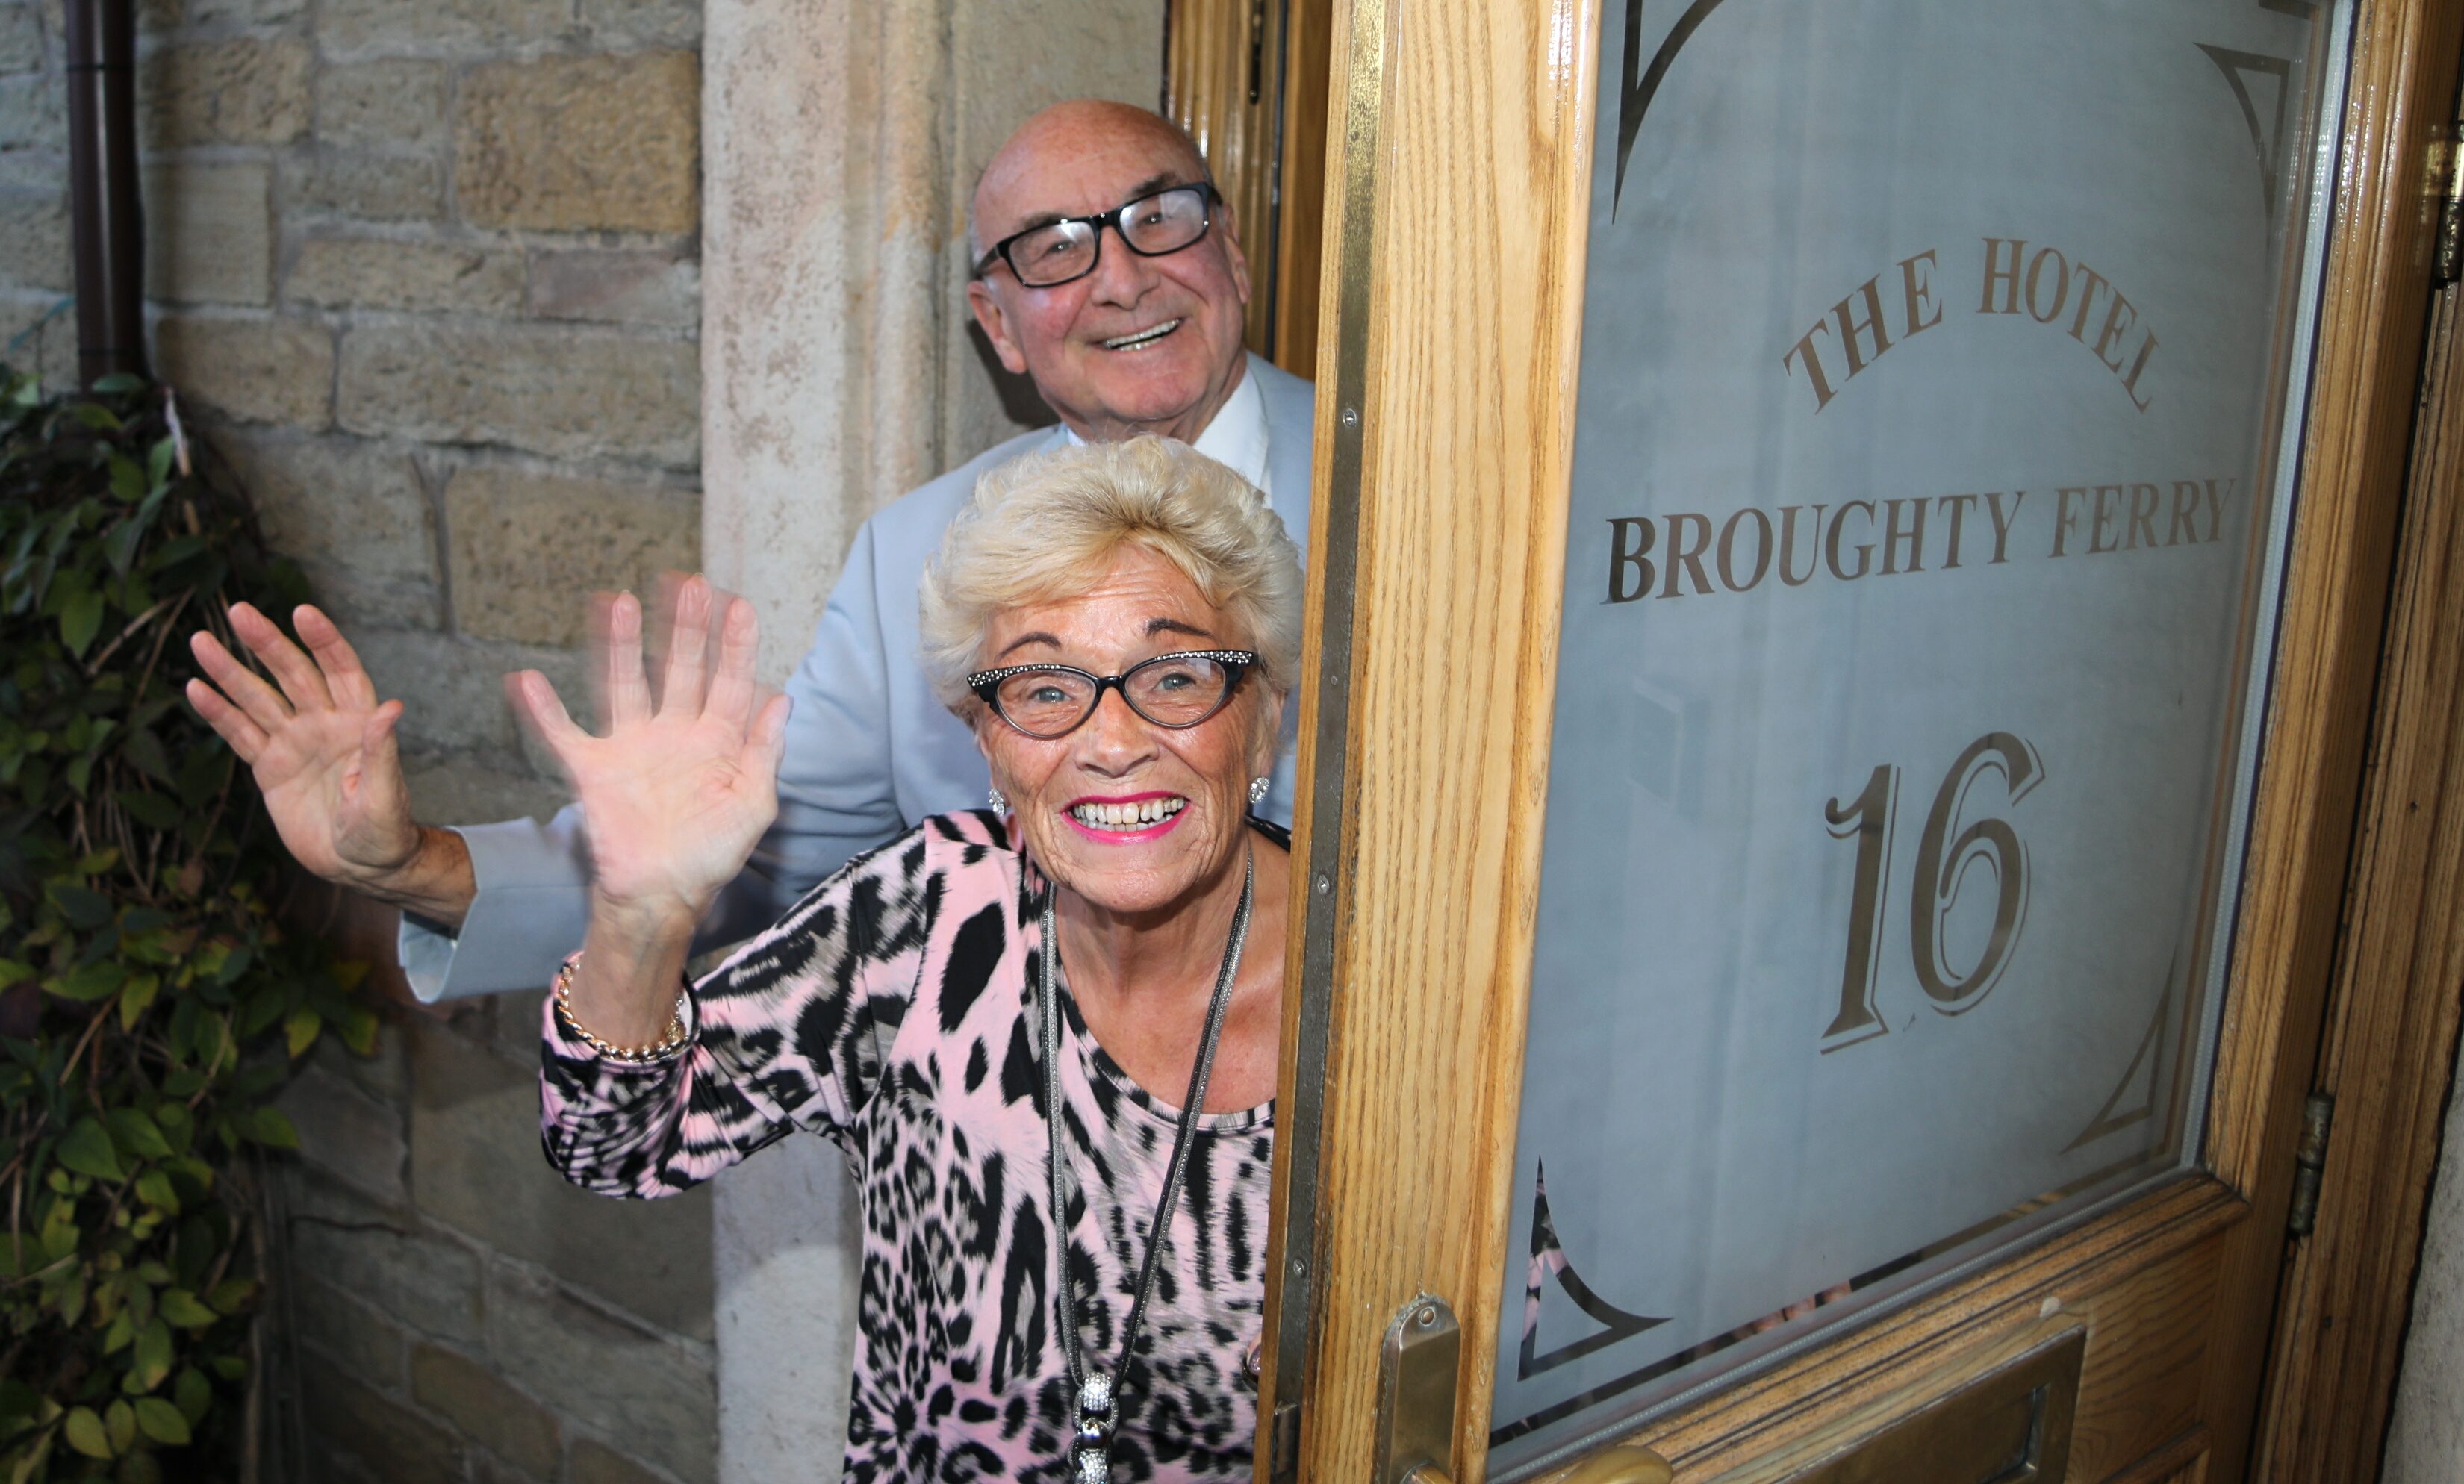 Geraldine and Jeff Stewart are retiring and selling the Broughty Ferry Hotel.